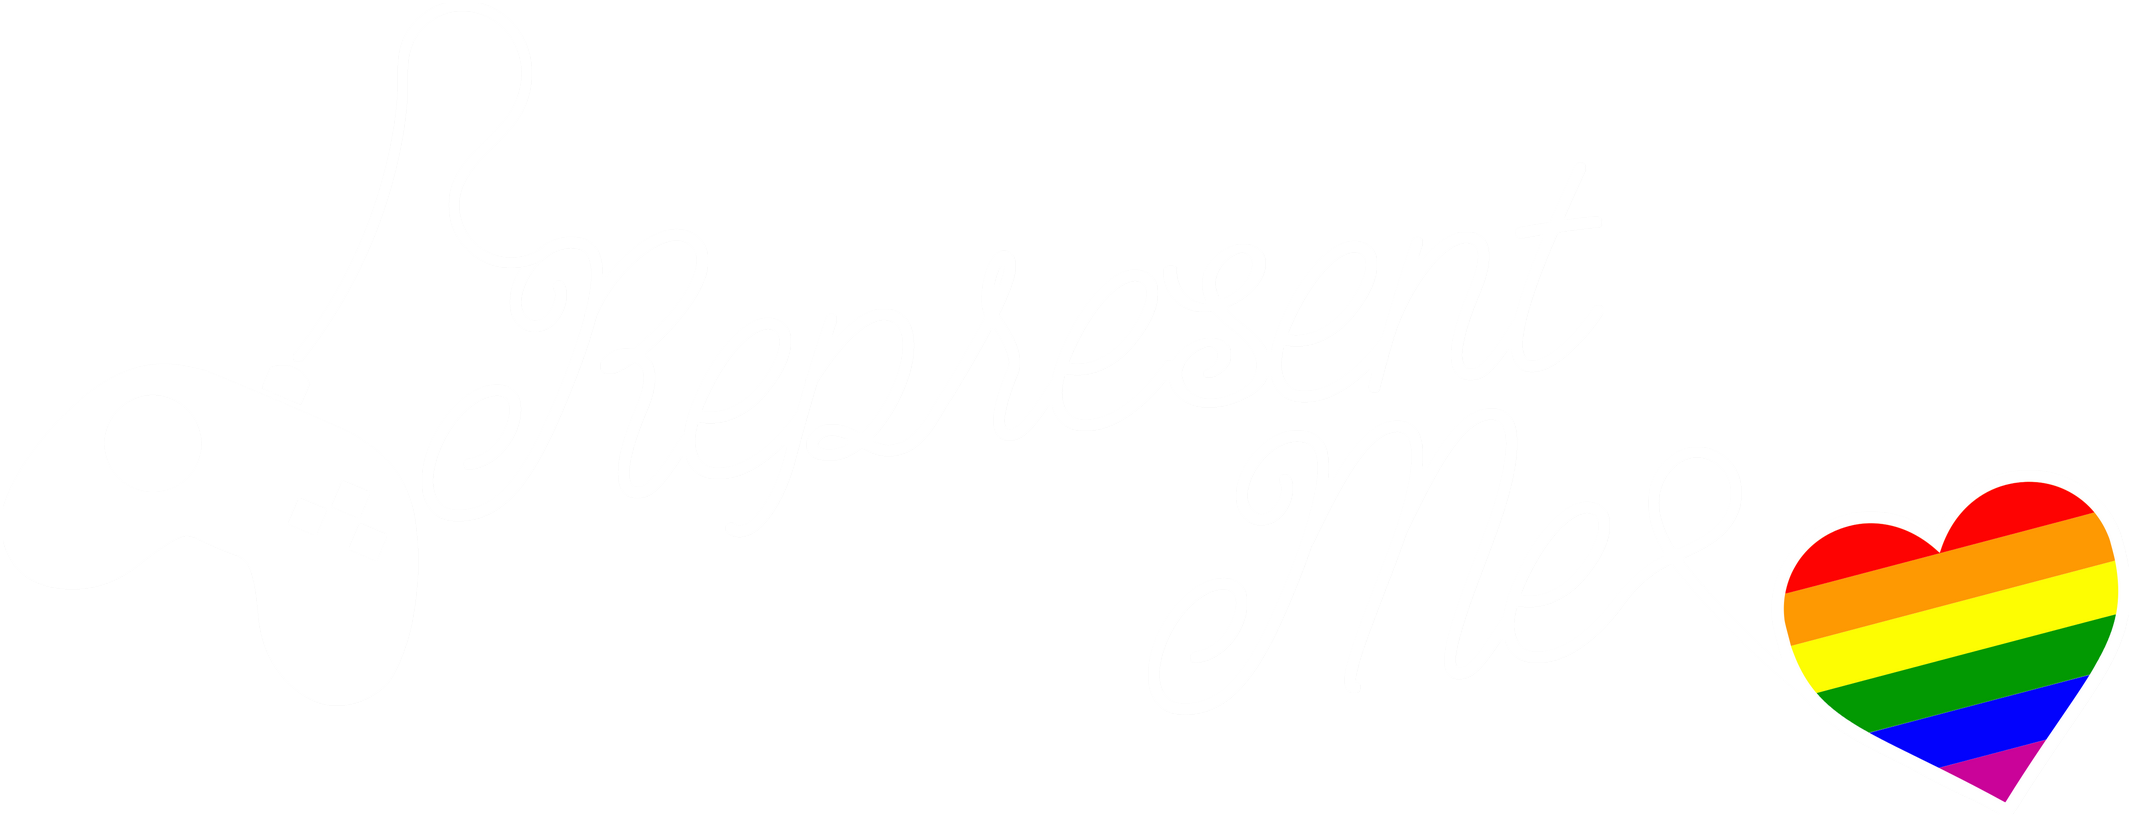 Represent Me banner, which links to the homepage.